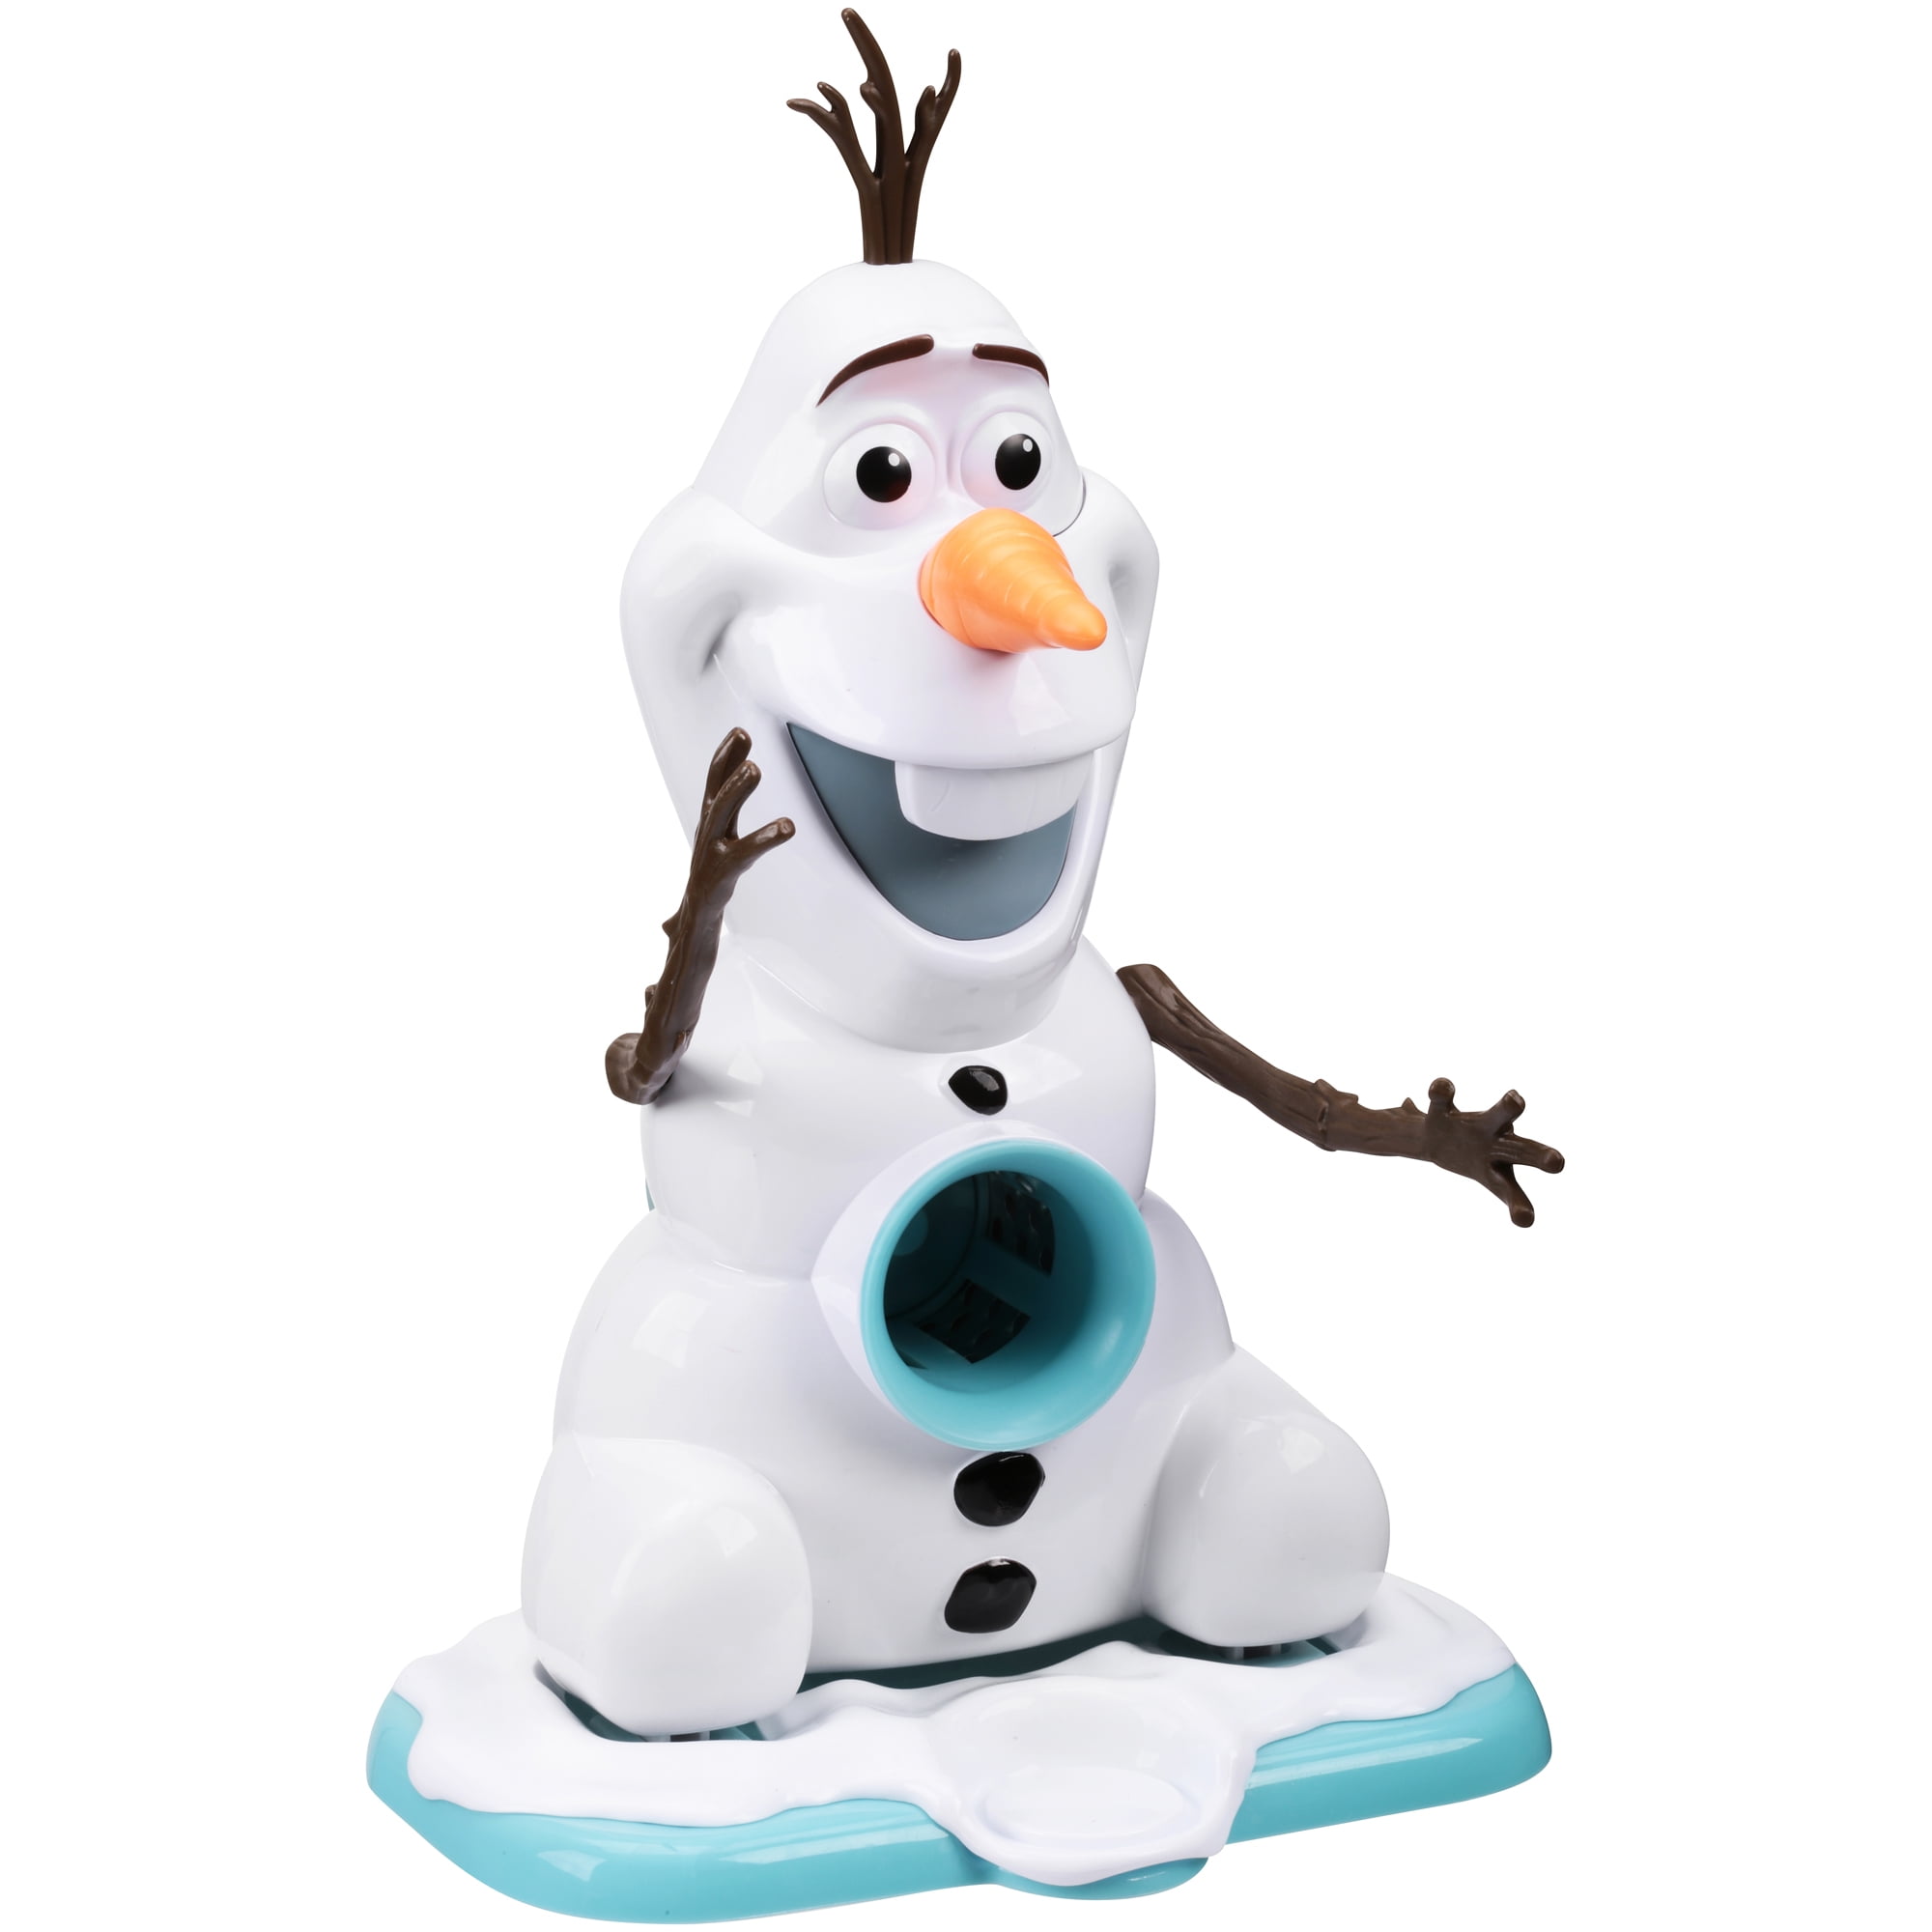 FROZEN 82098-CAN Olaf Snow Cone Maker